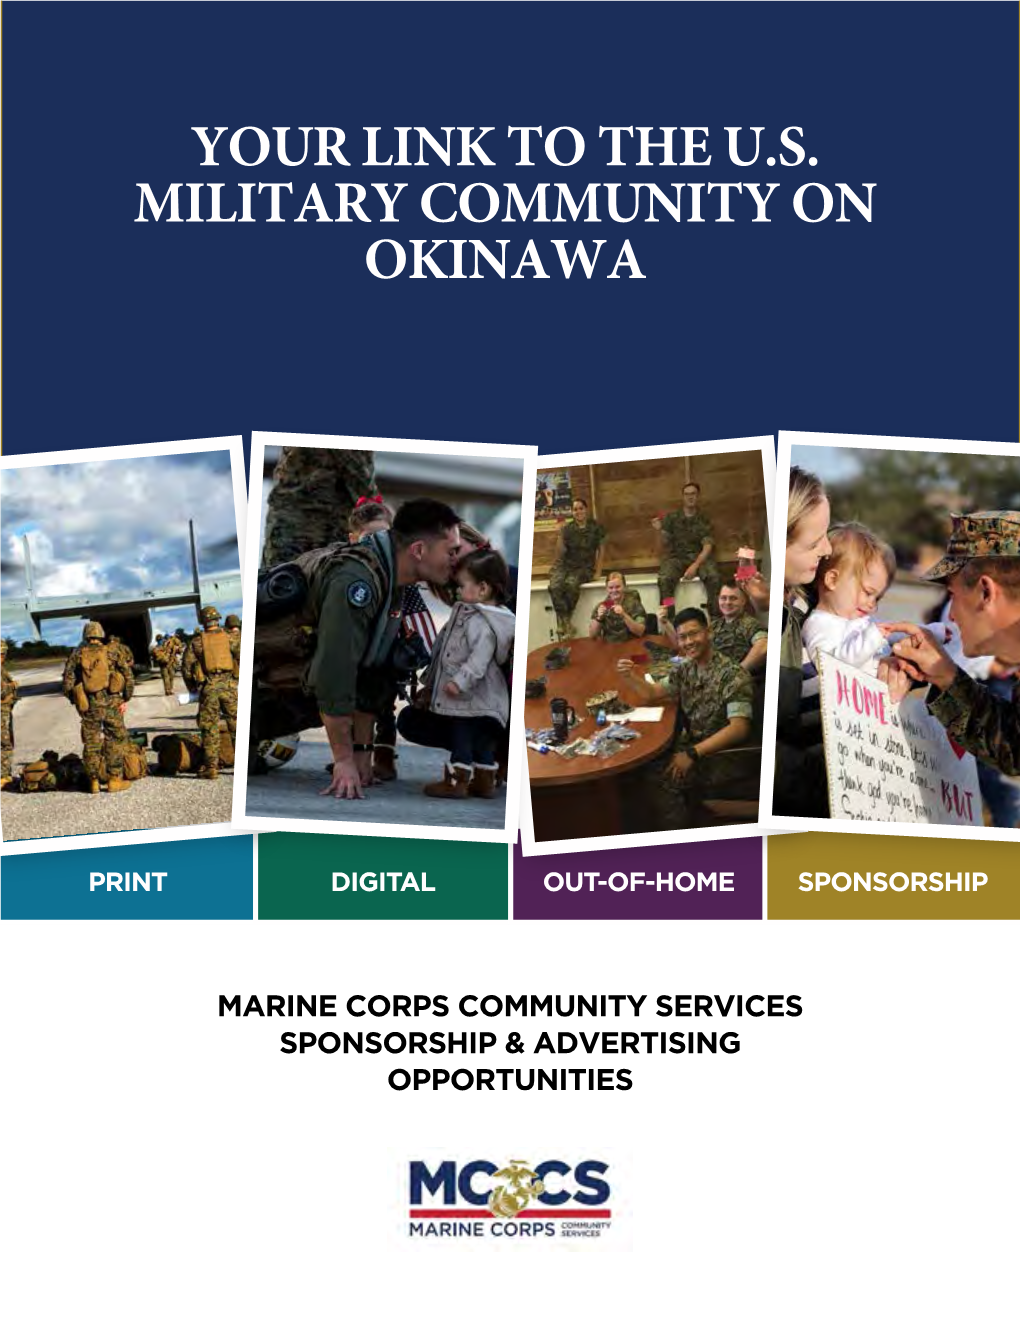 Your Link to the Us Military Community